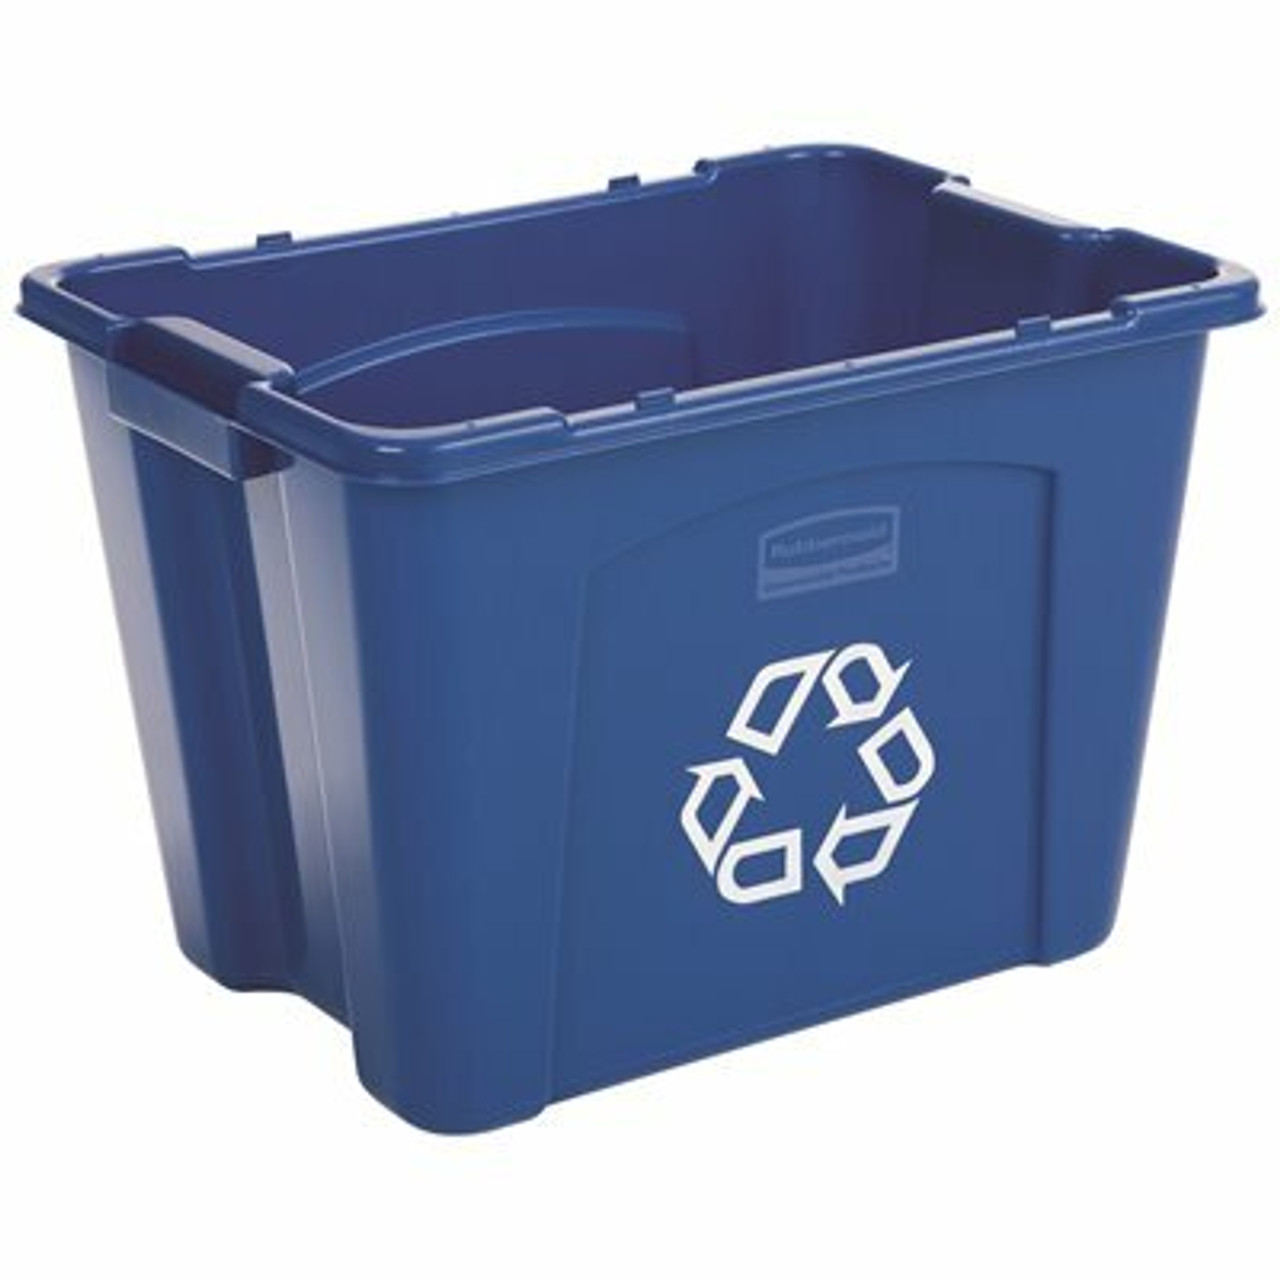 Rubbermaid Commercial Products 14 Gal. Blue Recycling Bin